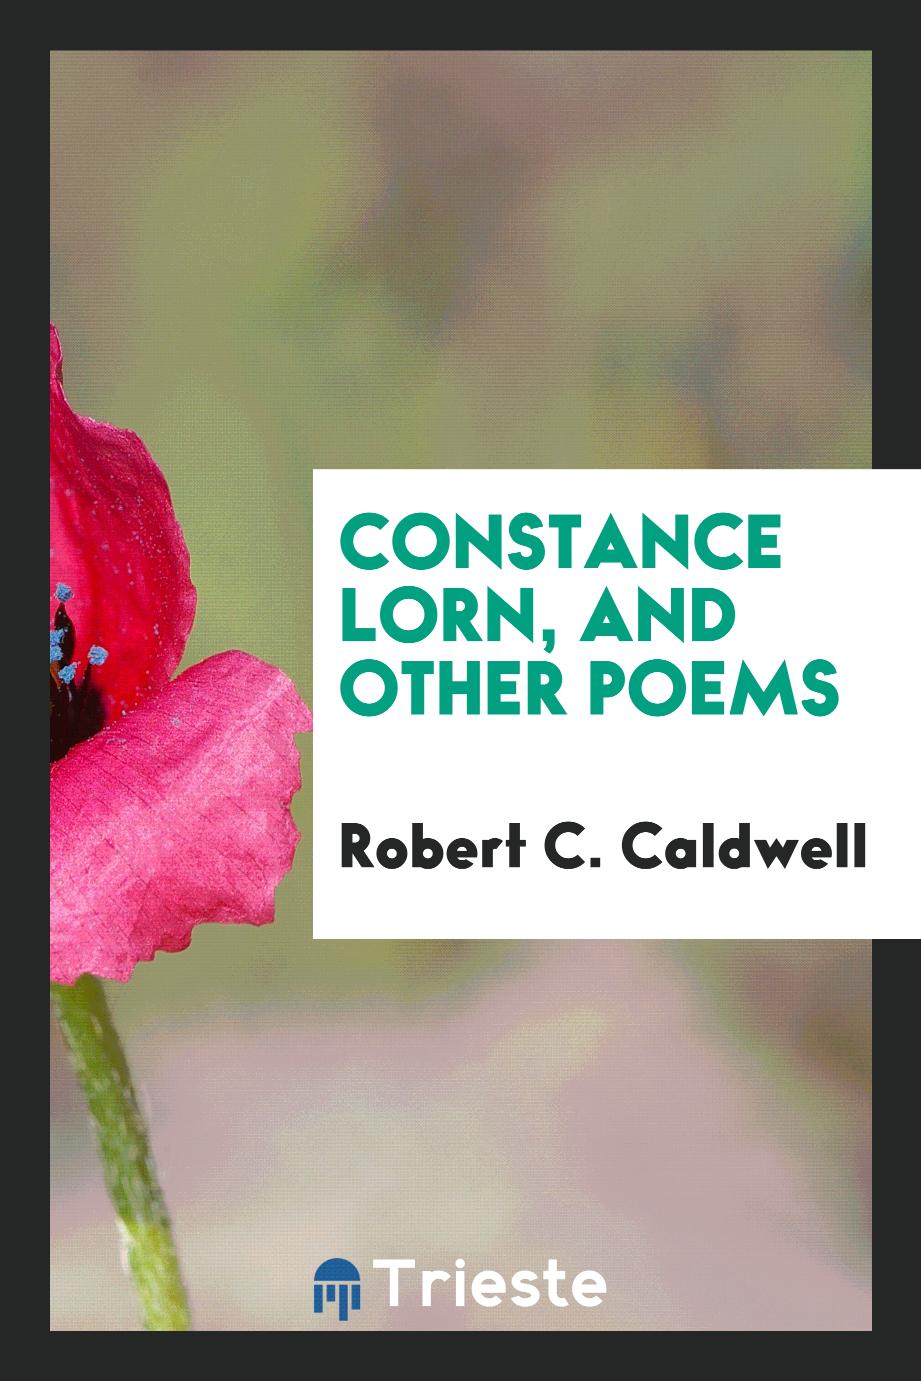 Constance Lorn, and Other Poems